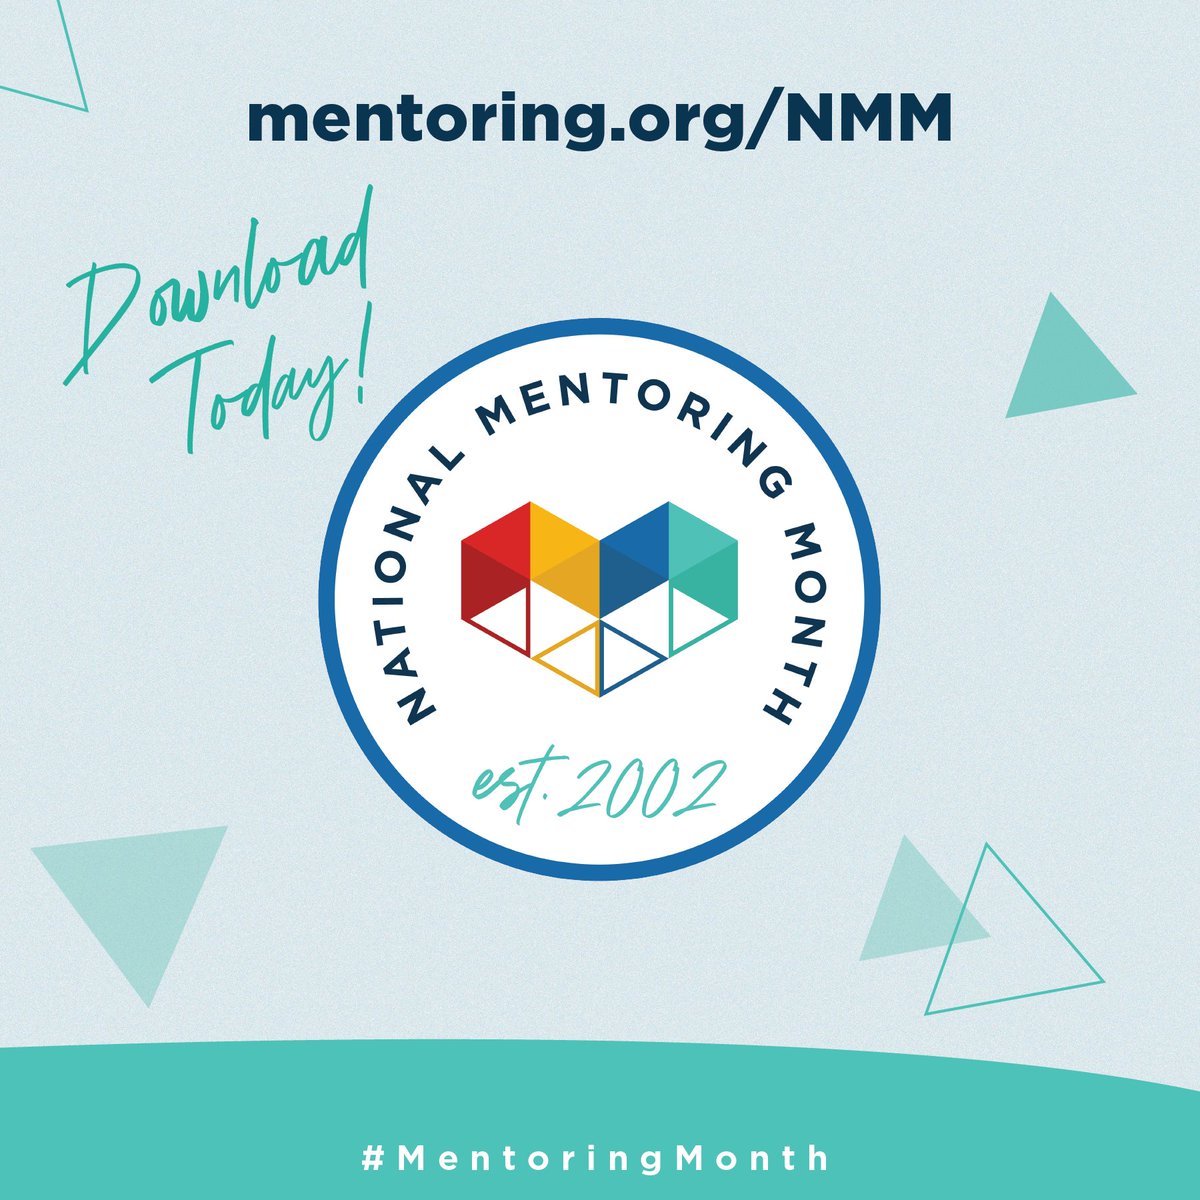 Excited about celebrating National #MentoringMonth with us this January but not sure how to spread the word far and wide? Check out our Digital Engagement Toolkit for important dates, toolkit resources & much more! 👉 tinyurl.com/54ewu76y #MentoringAmplifies